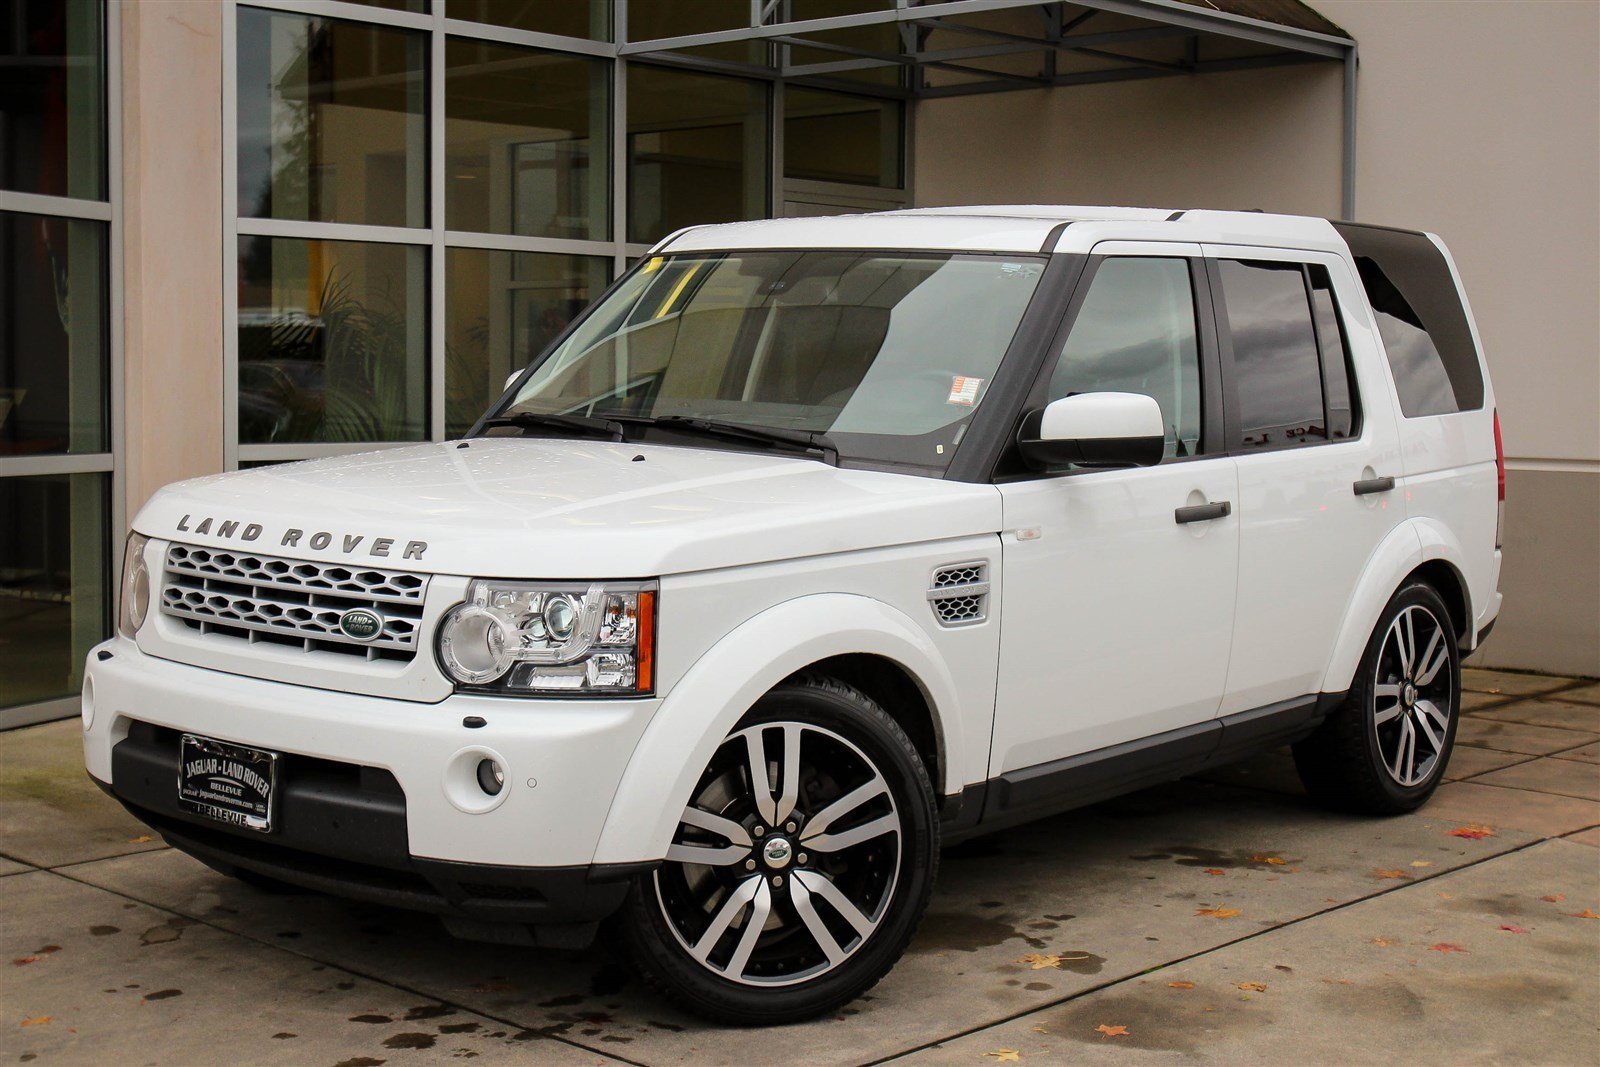 Pre-Owned 2012 Land Rover LR4 HSE Sport Utility in Lynnwood #72331A